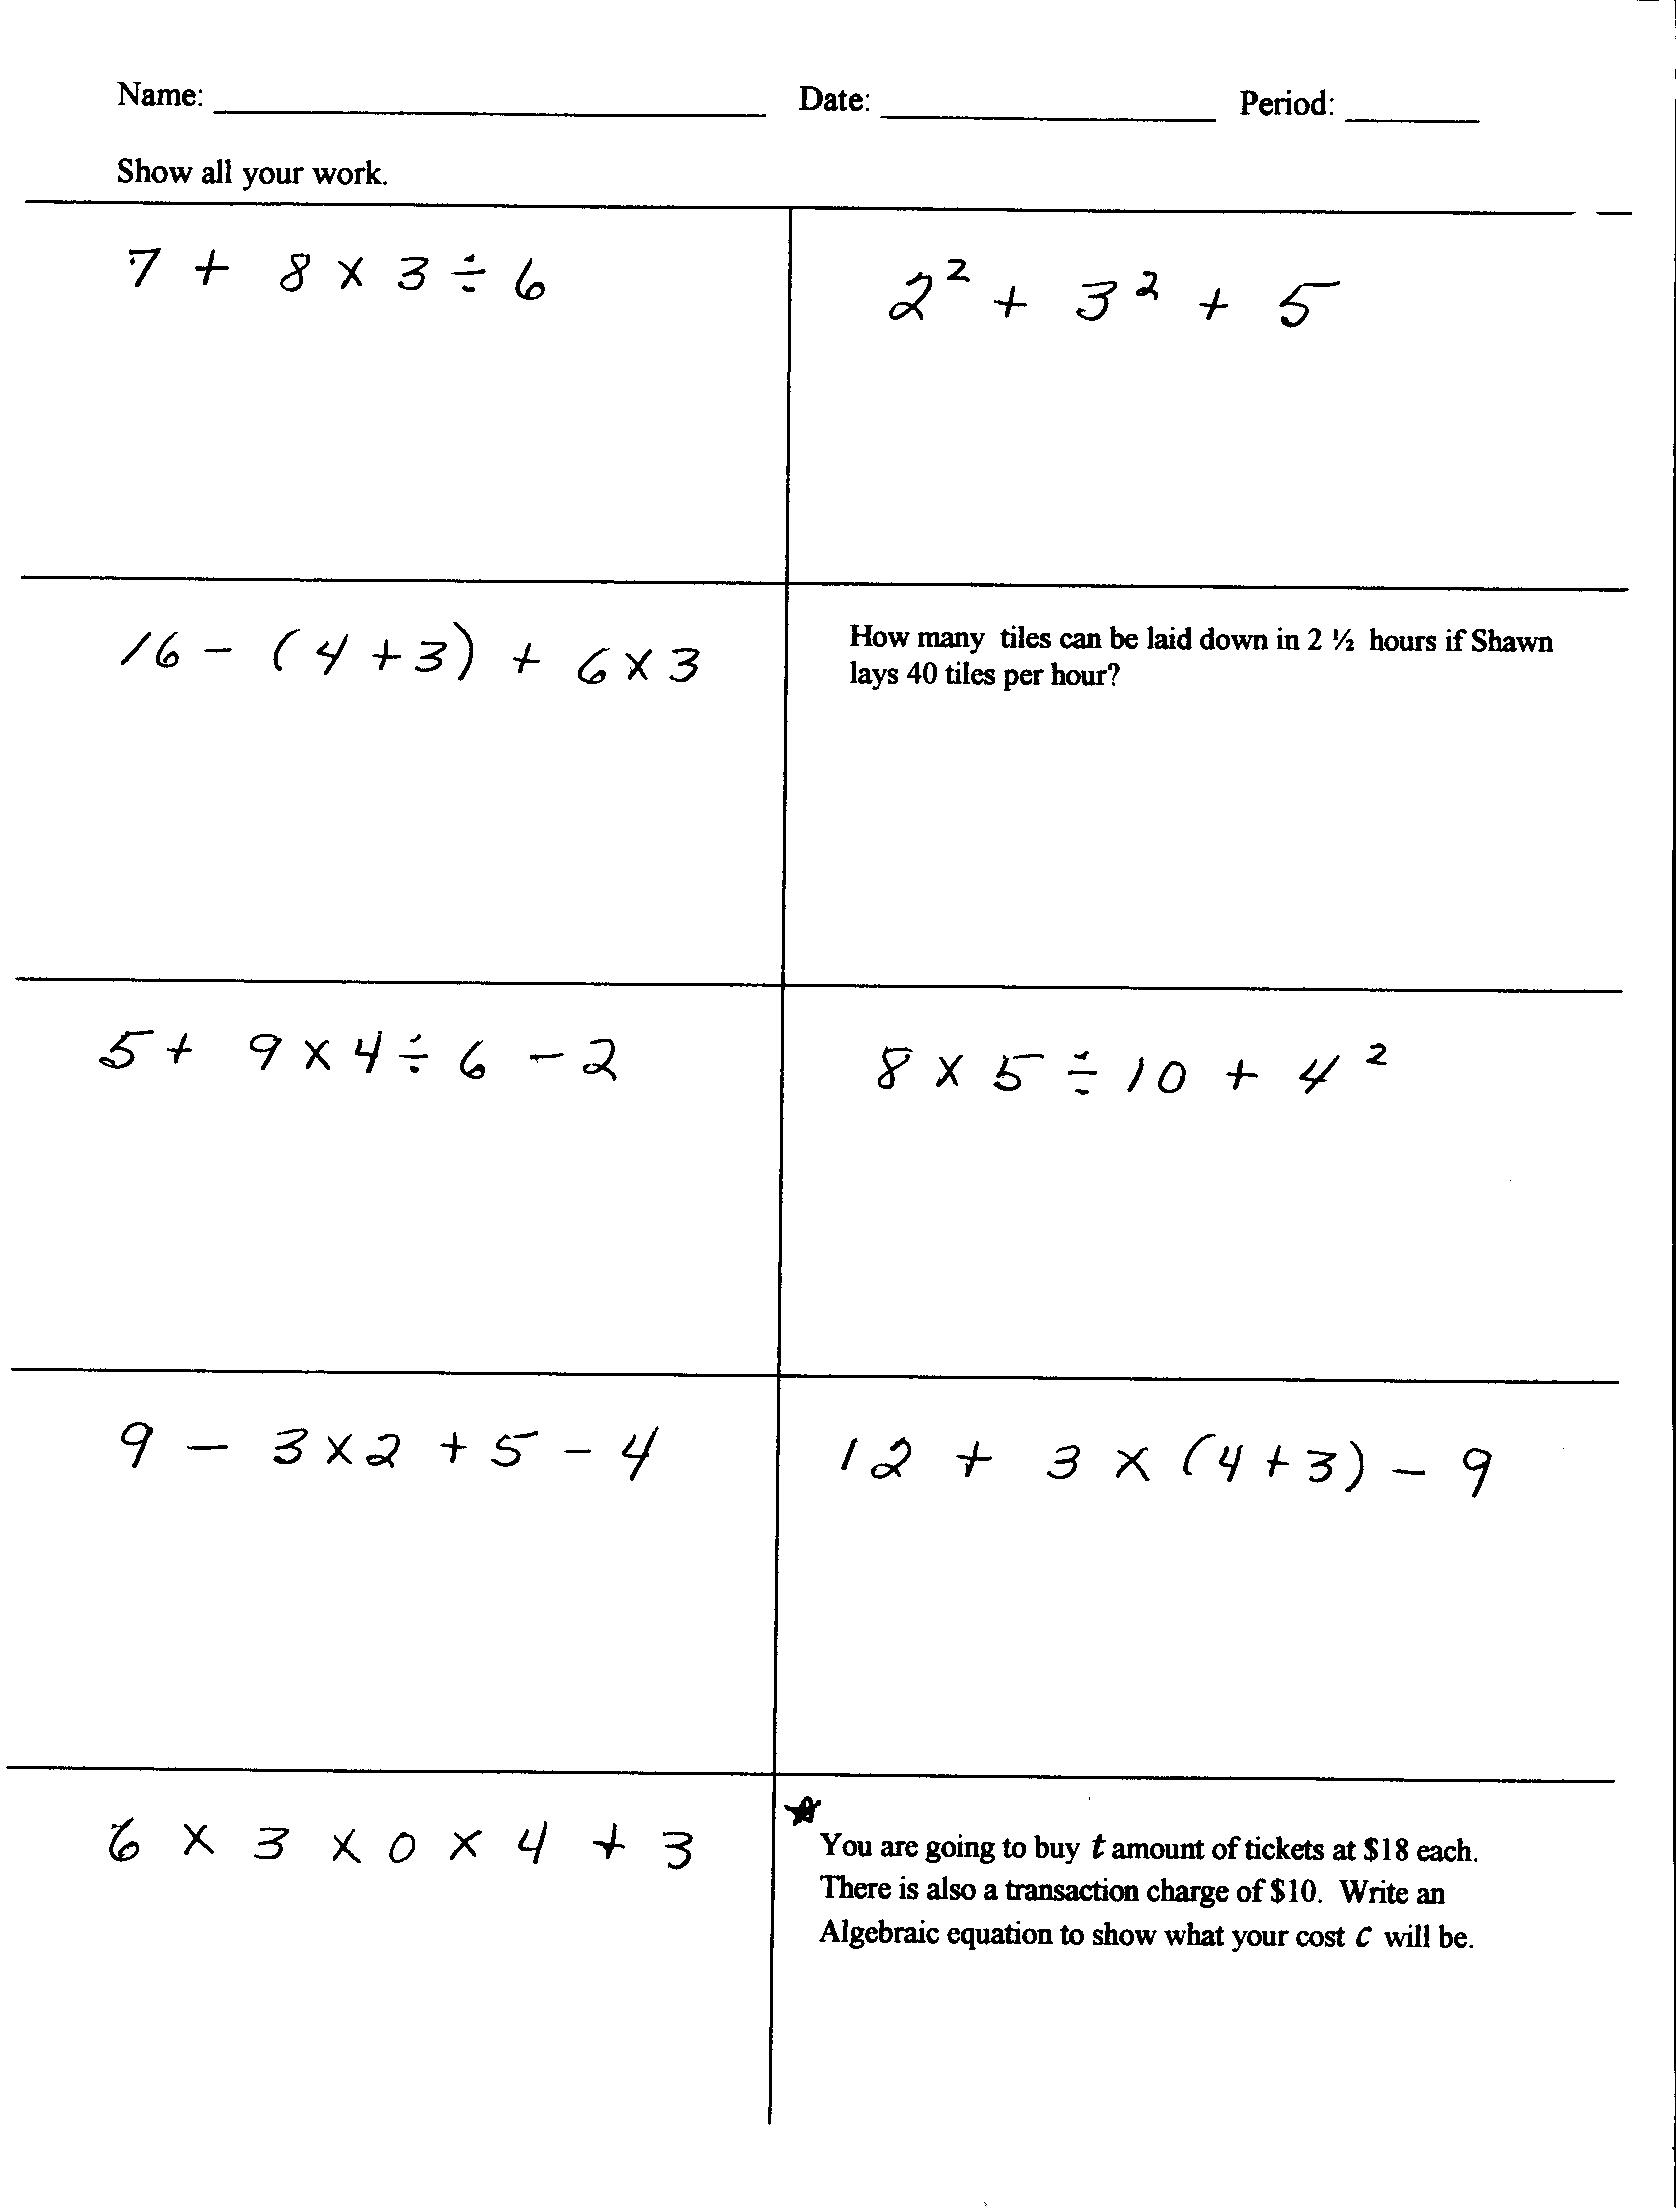 order-of-operations-worksheet-6th-grade-db-excelcom-great-order-of